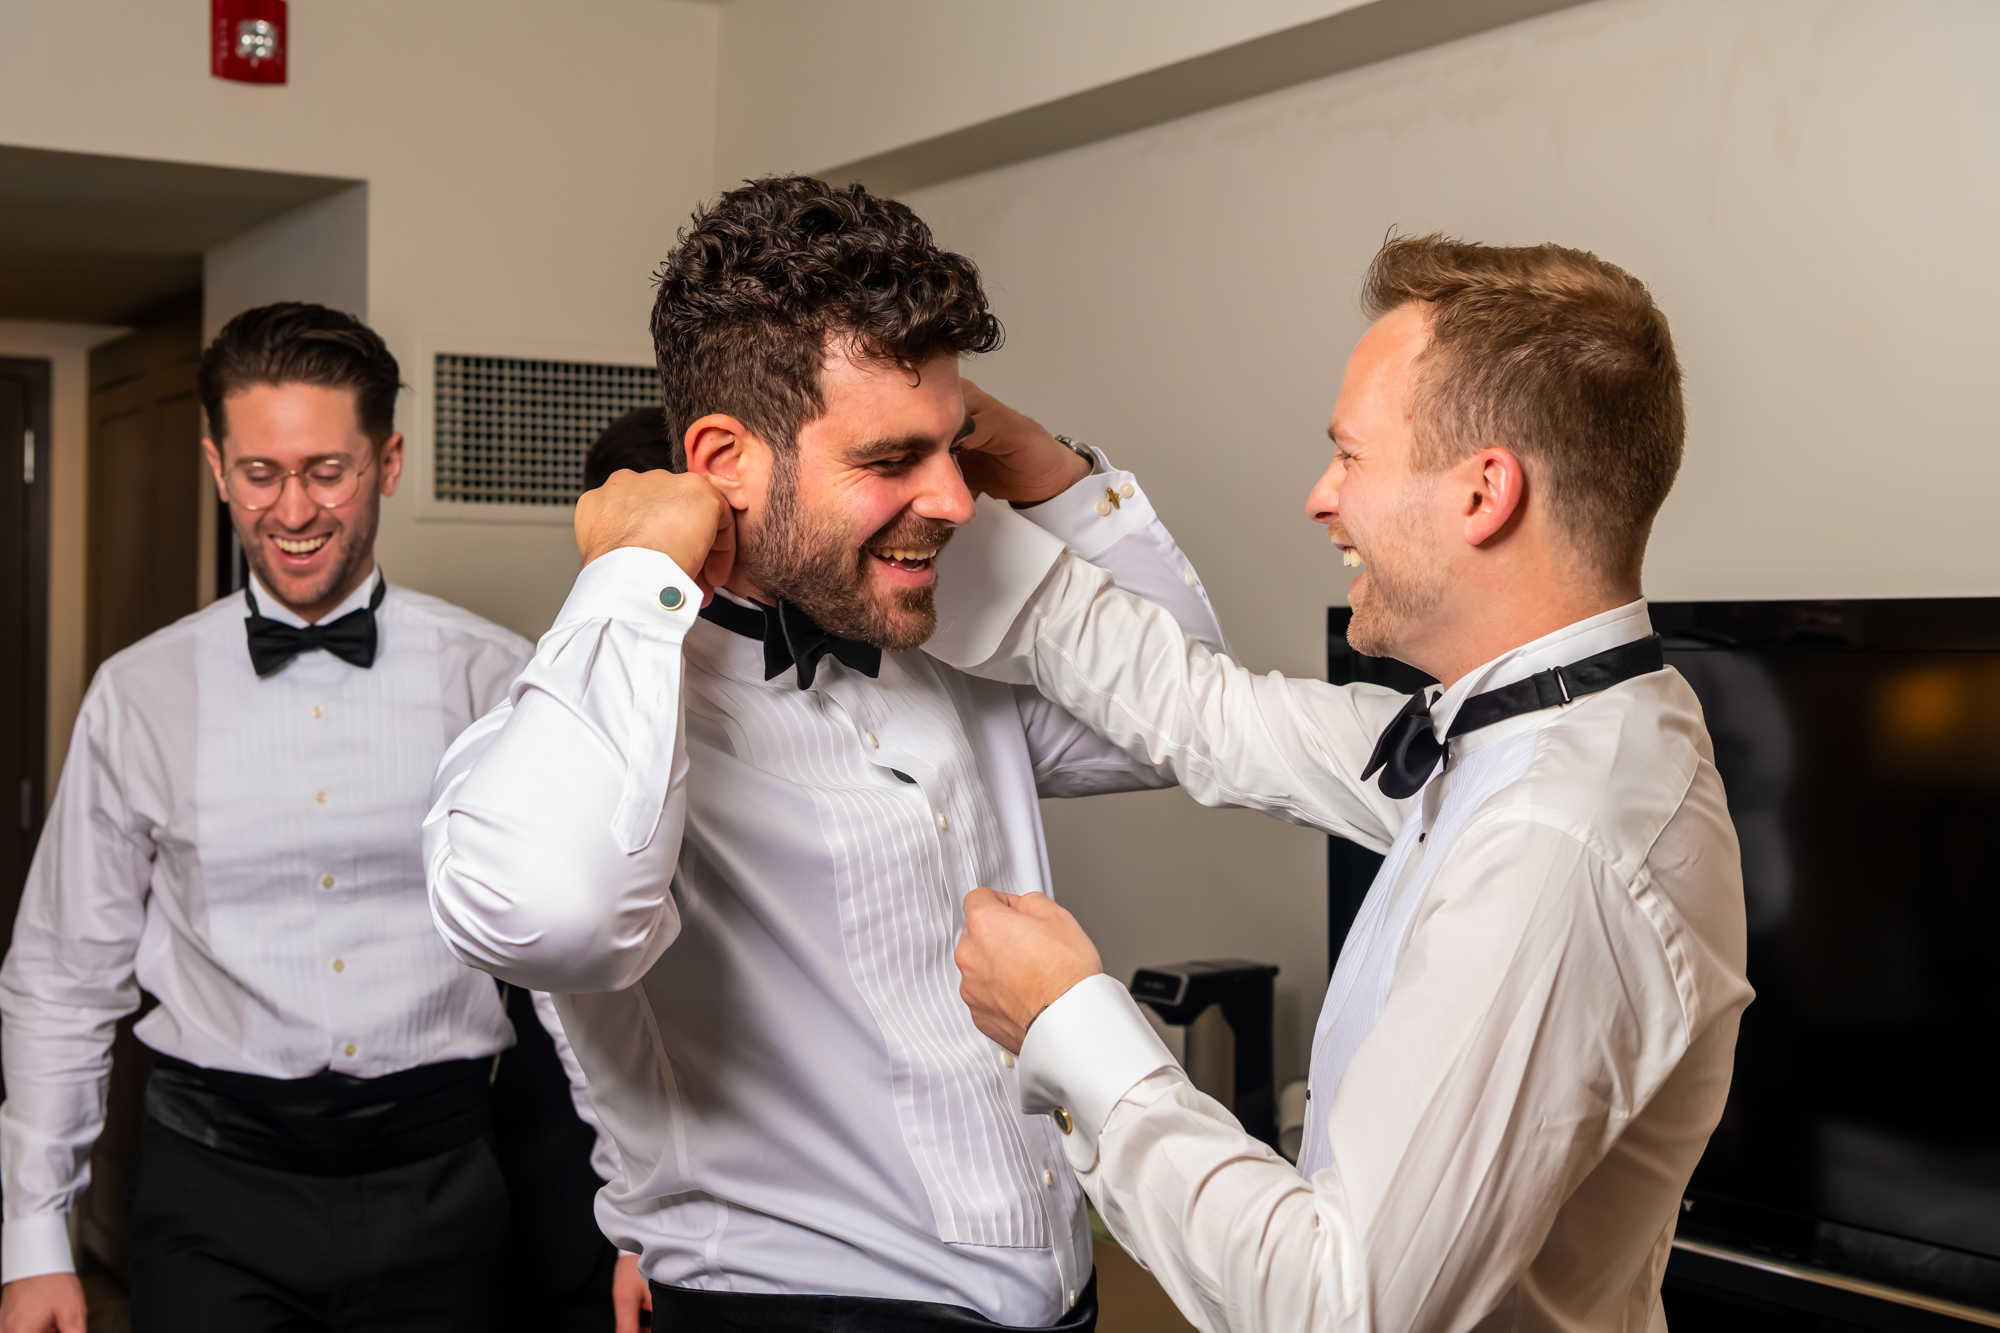 Groom getting ready with his guys